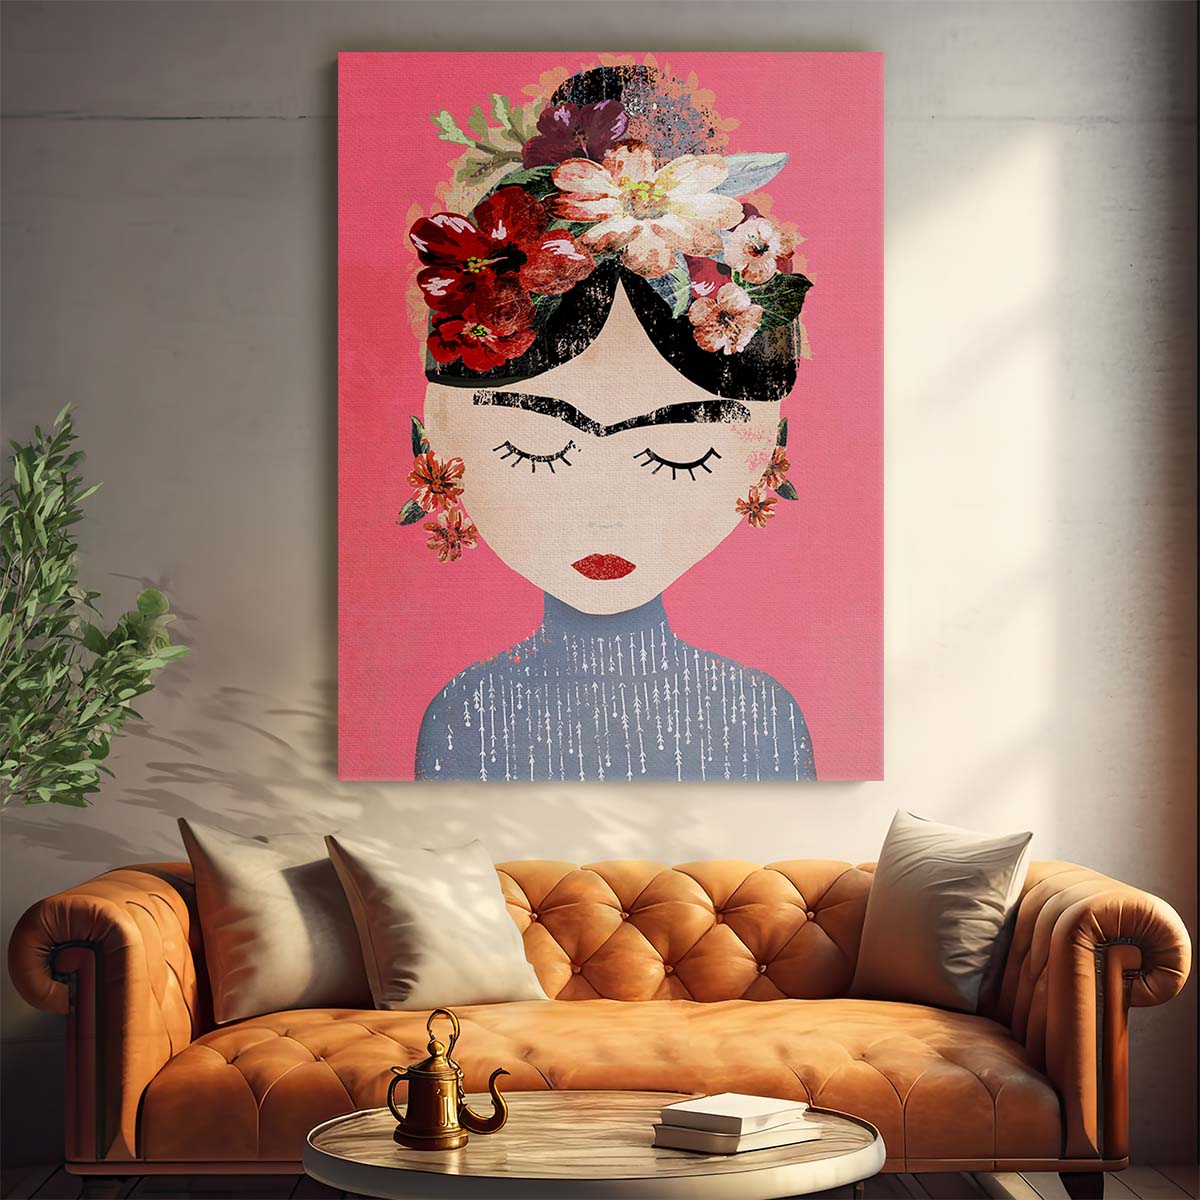 Frida Kahlo Floral Portrait Illustration with Vibrant Pink Background by Luxuriance Designs, made in USA